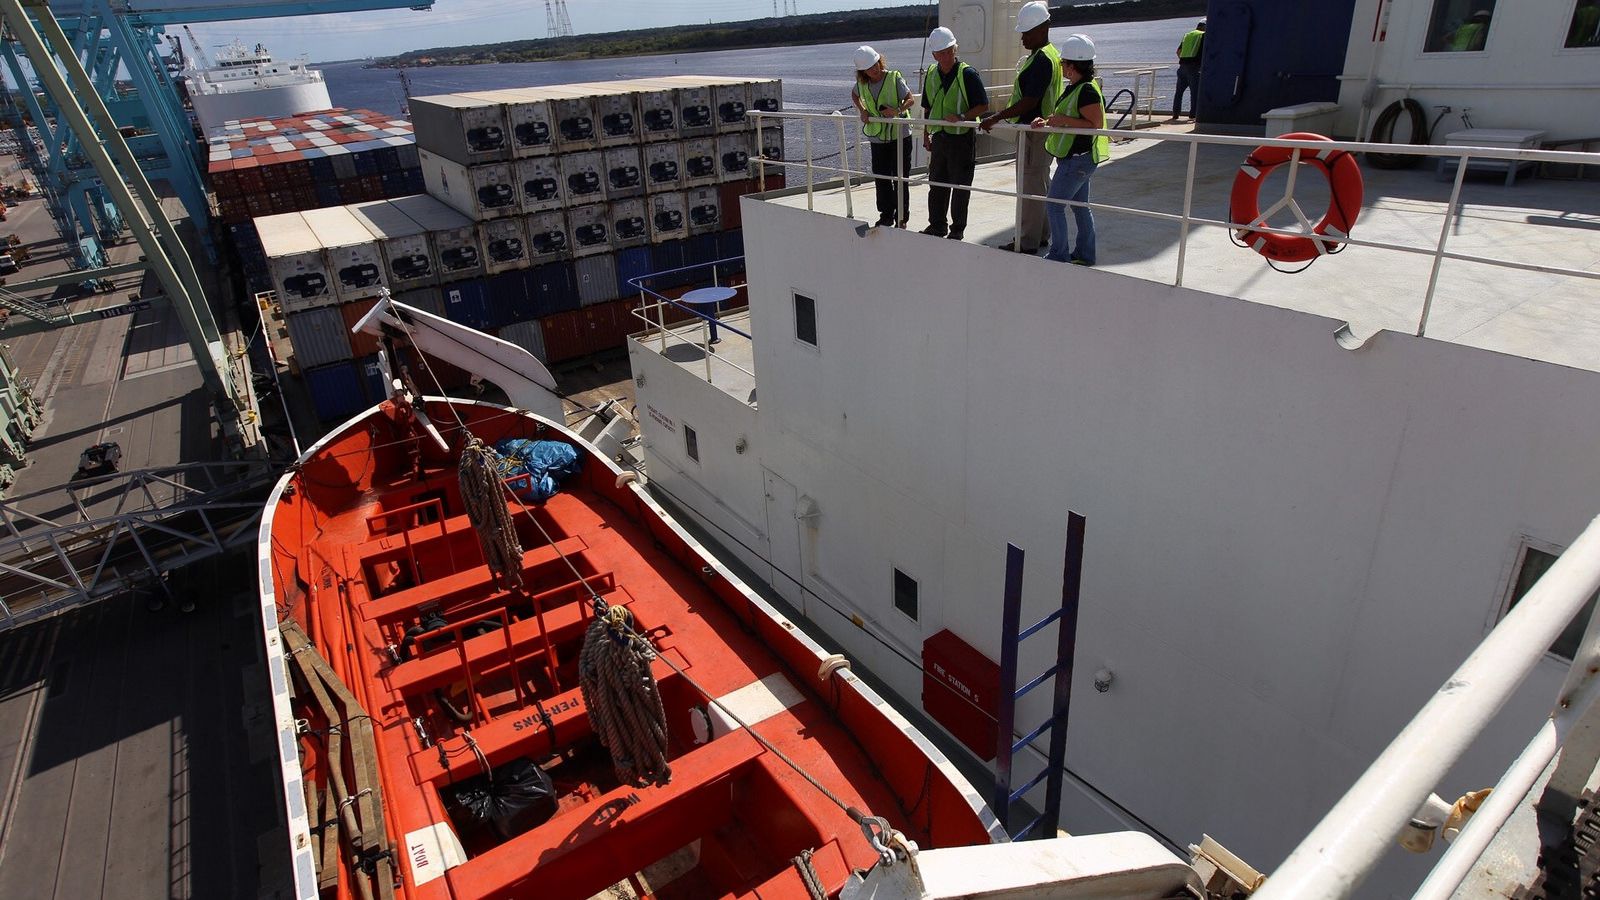 Ntsb Releases Its Final Report On The El Faro Tragedy